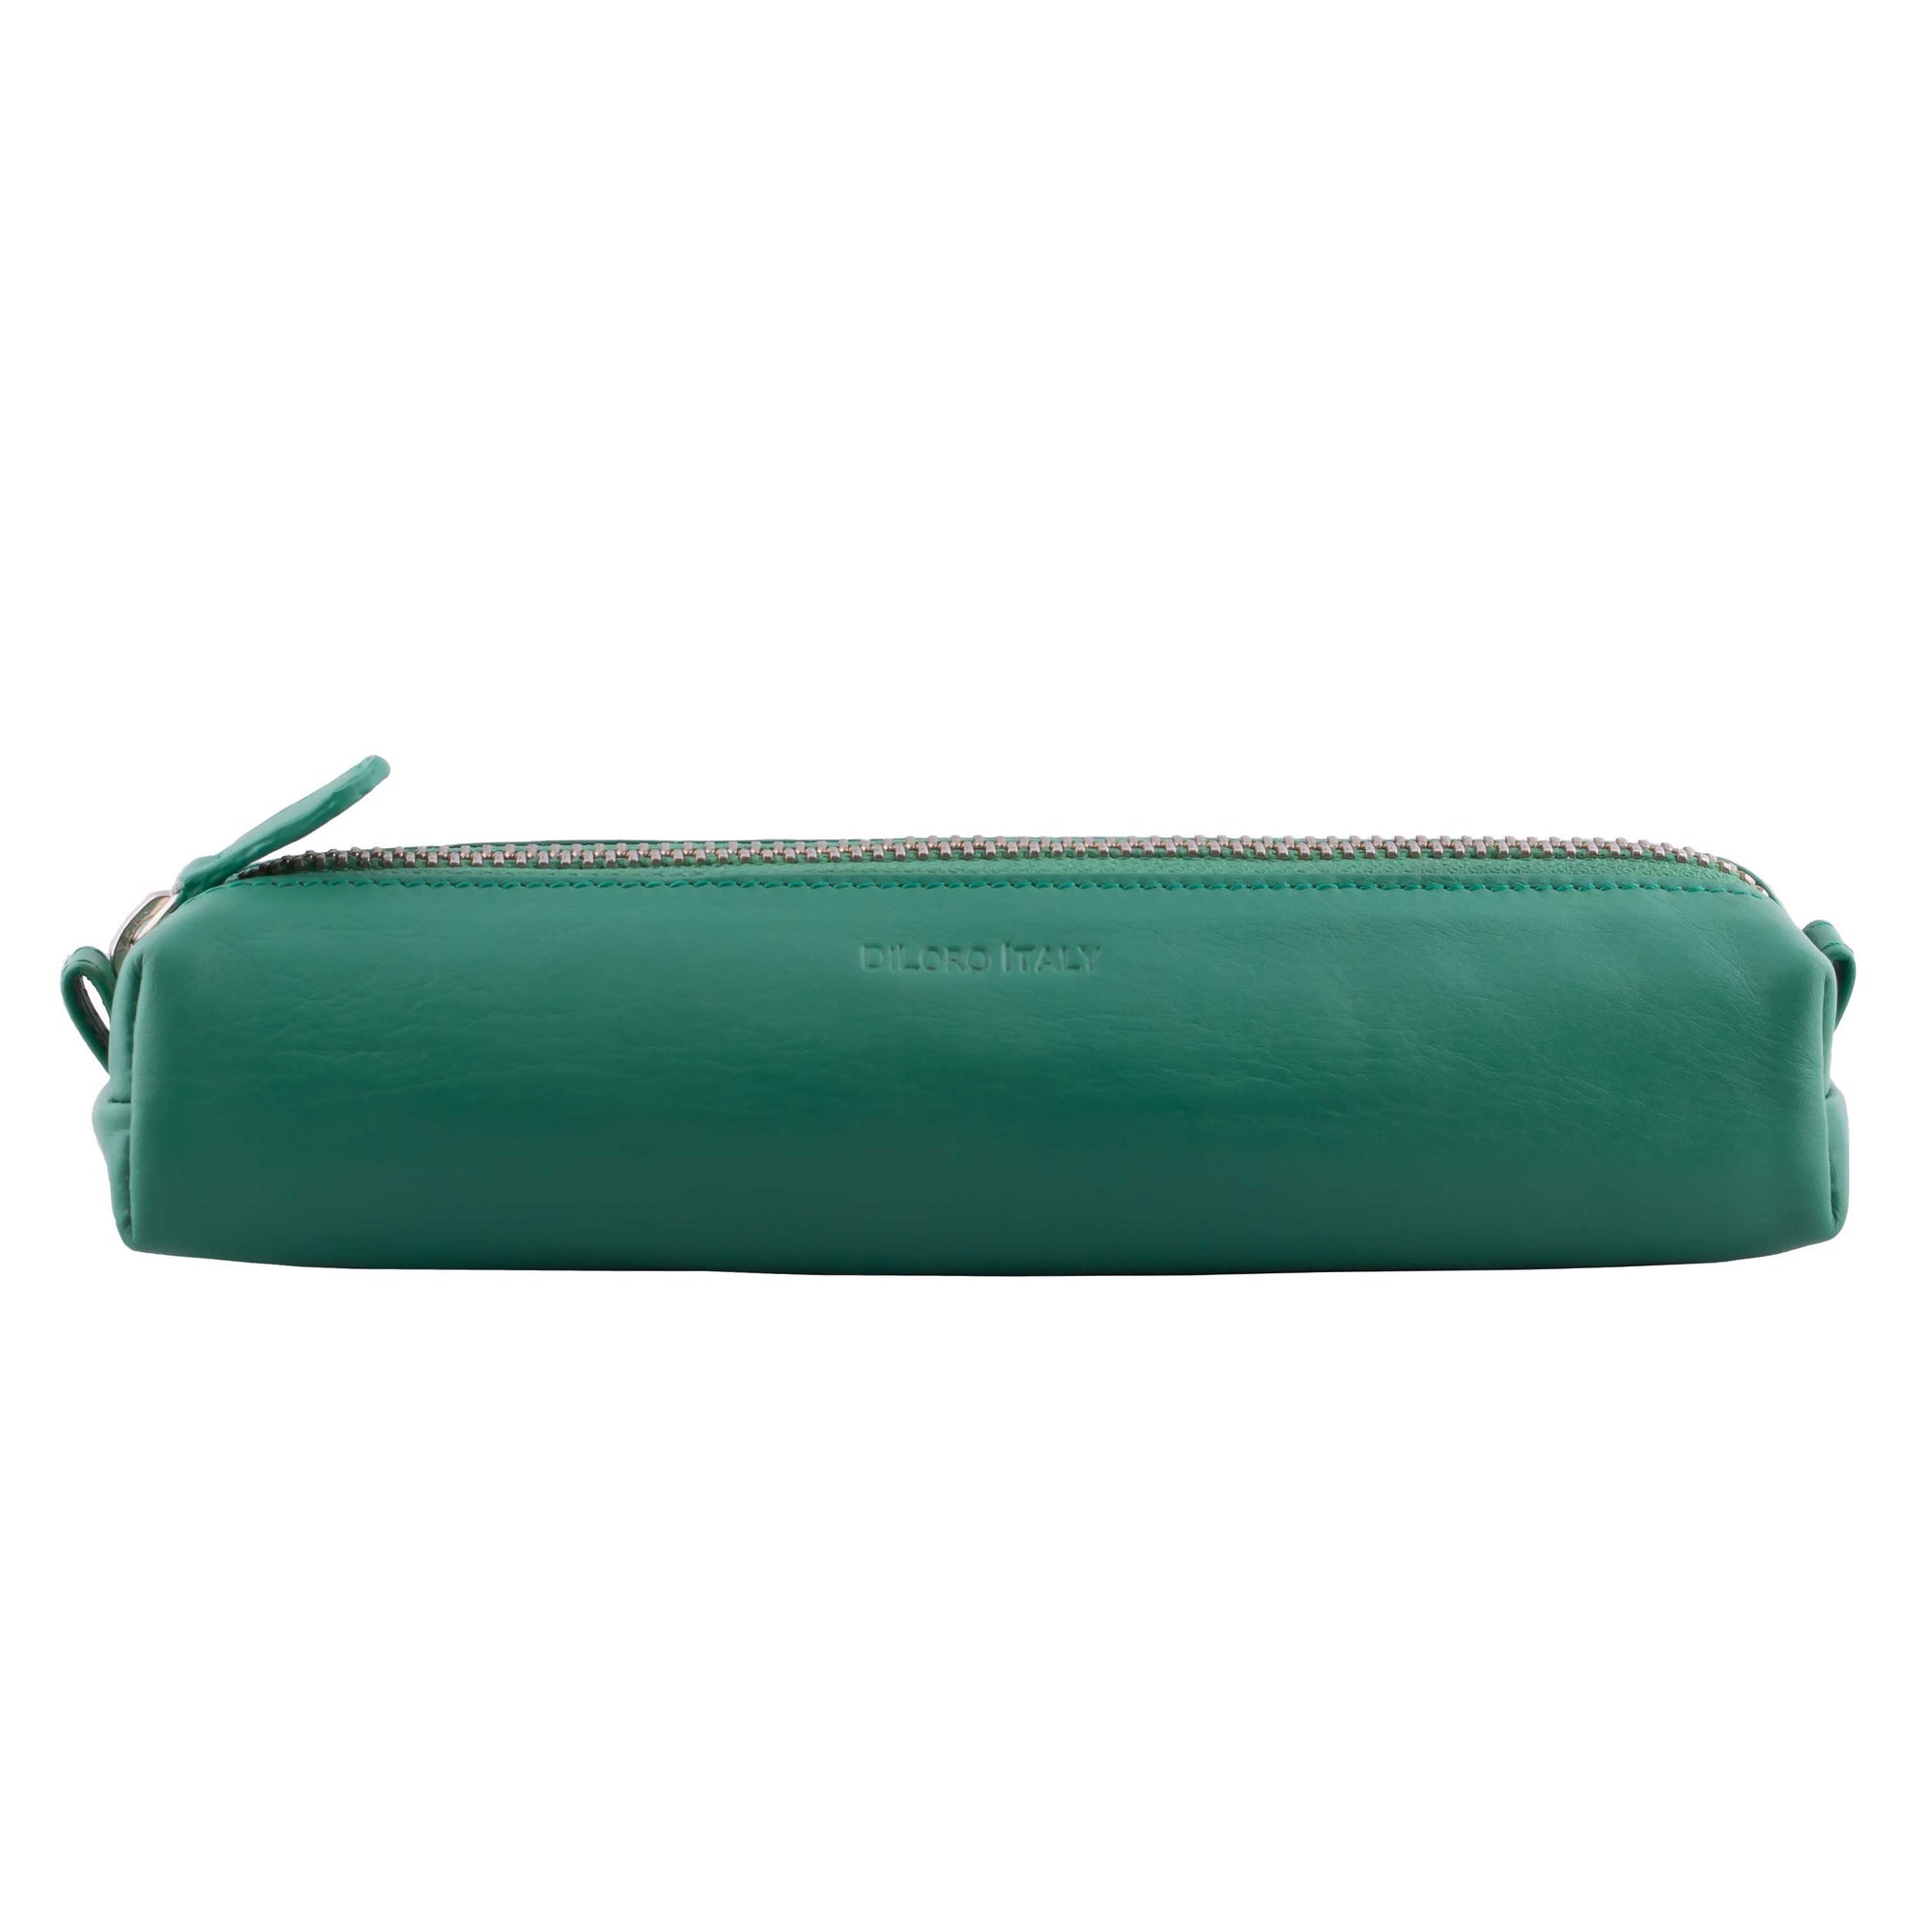 Multi-Purpose Zippered Leather Pen Pencil Case in Various Colors - Light Green